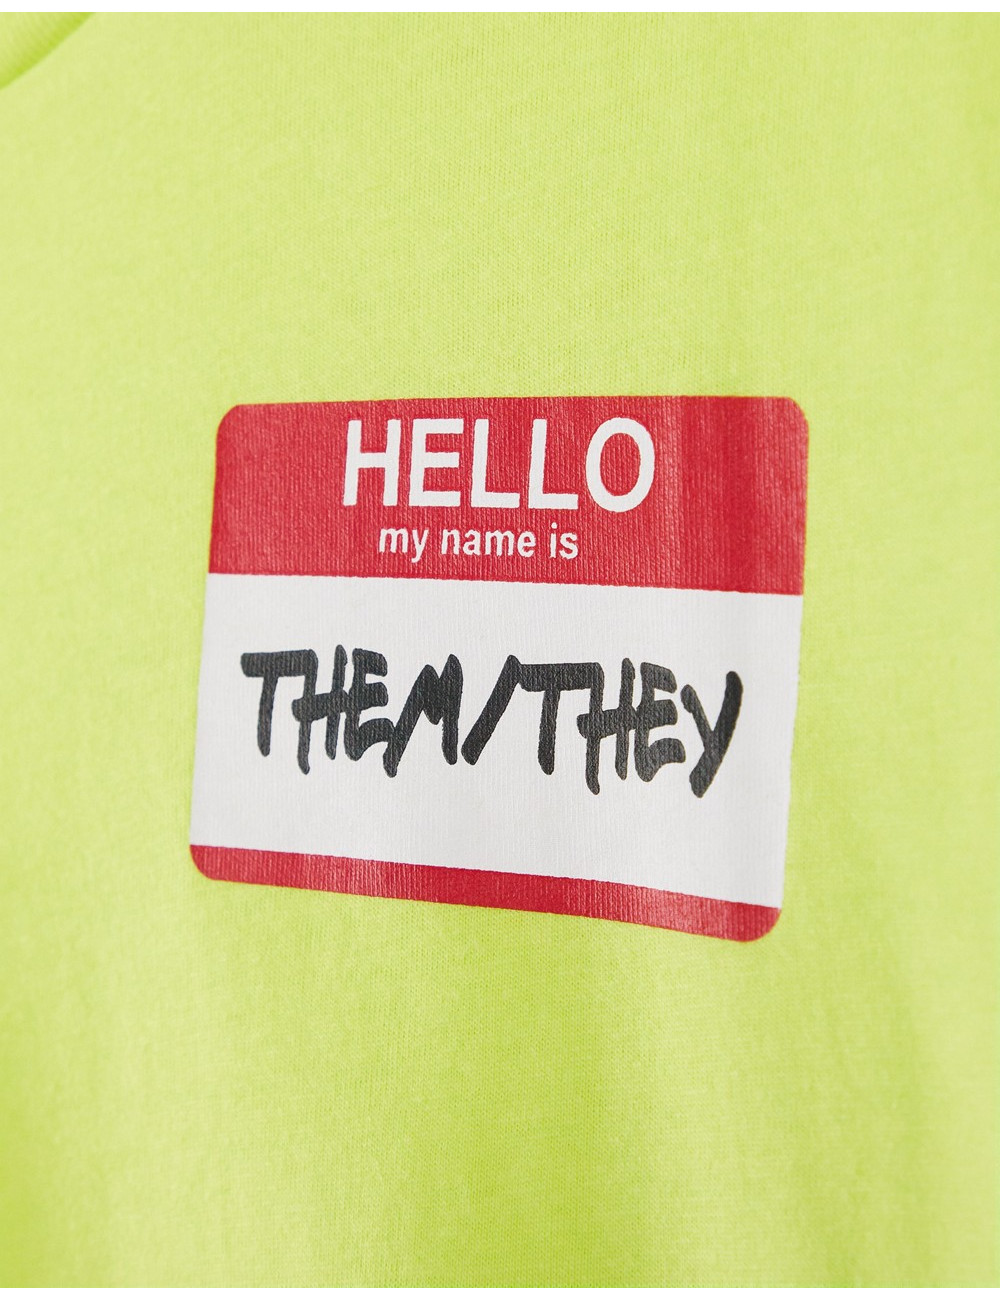 WESC max them/they t-shirt